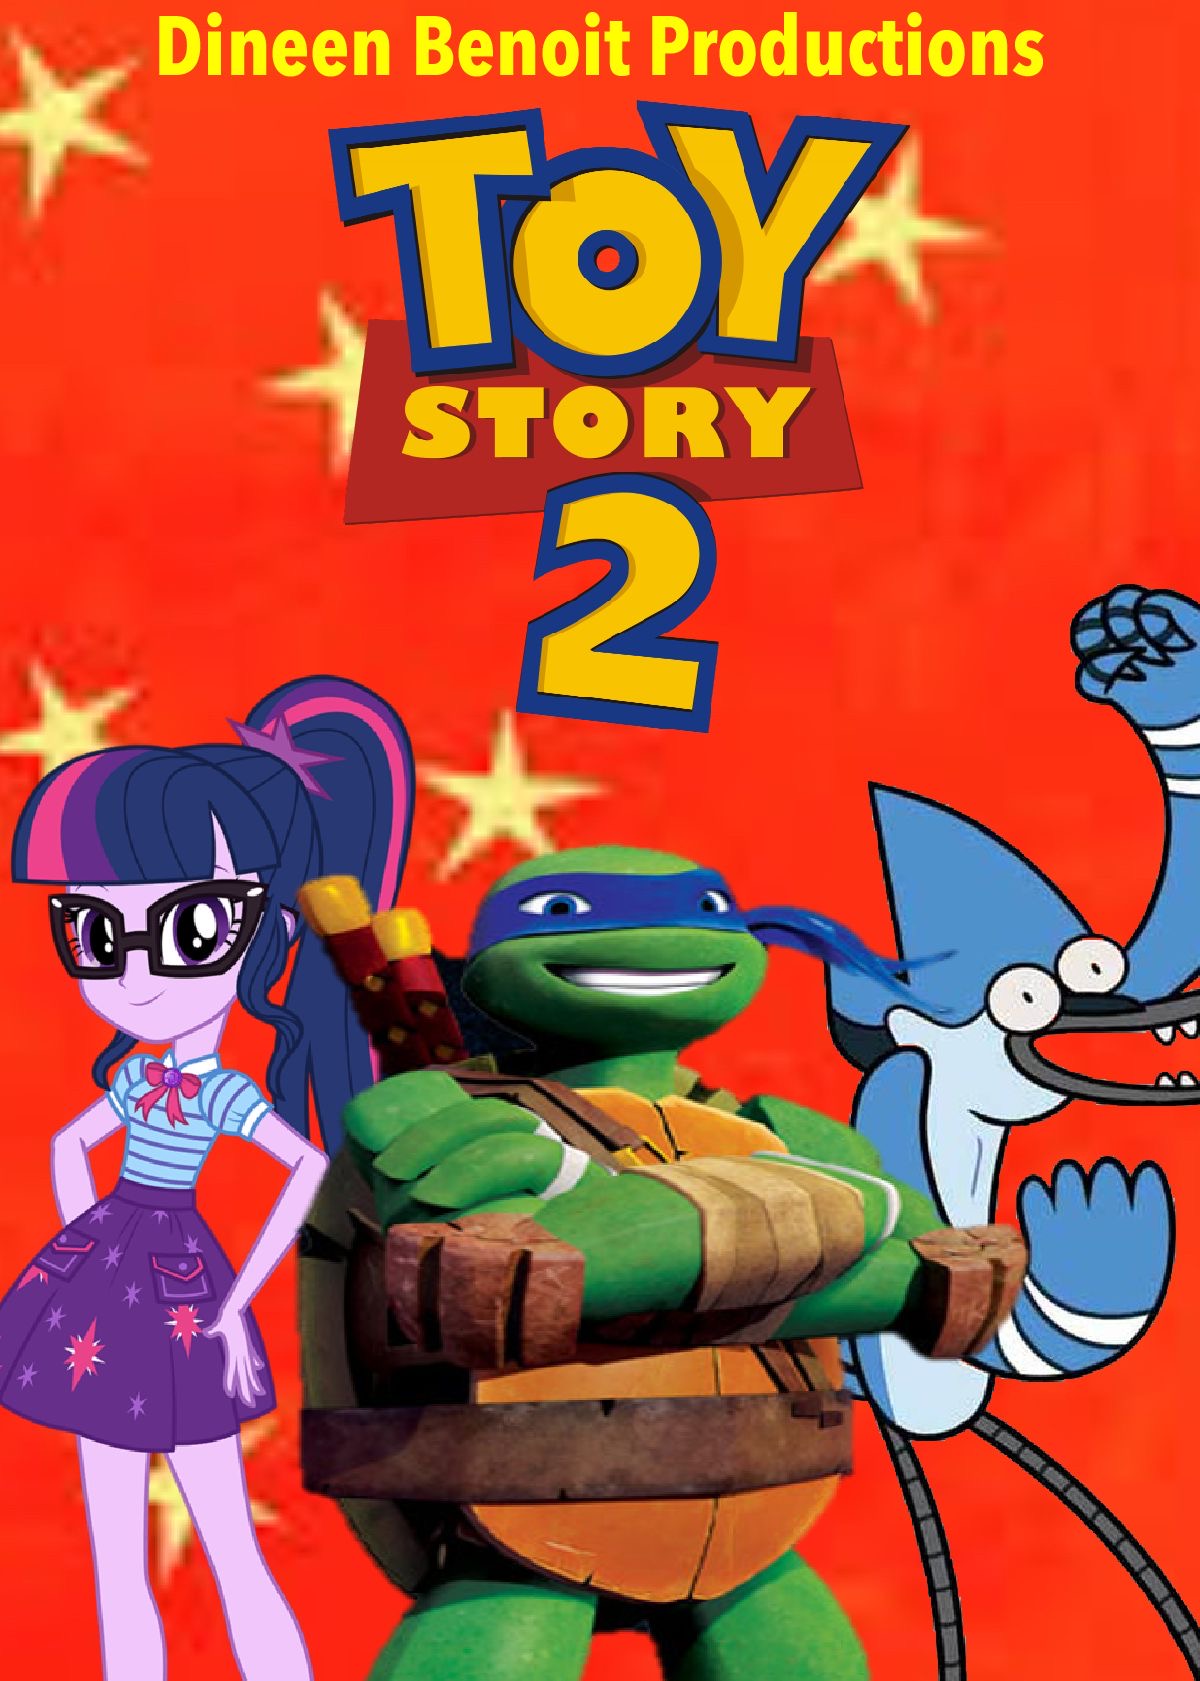 Toy Story 2 Dineen Benoit Productions Style The Parody Wiki Fandom